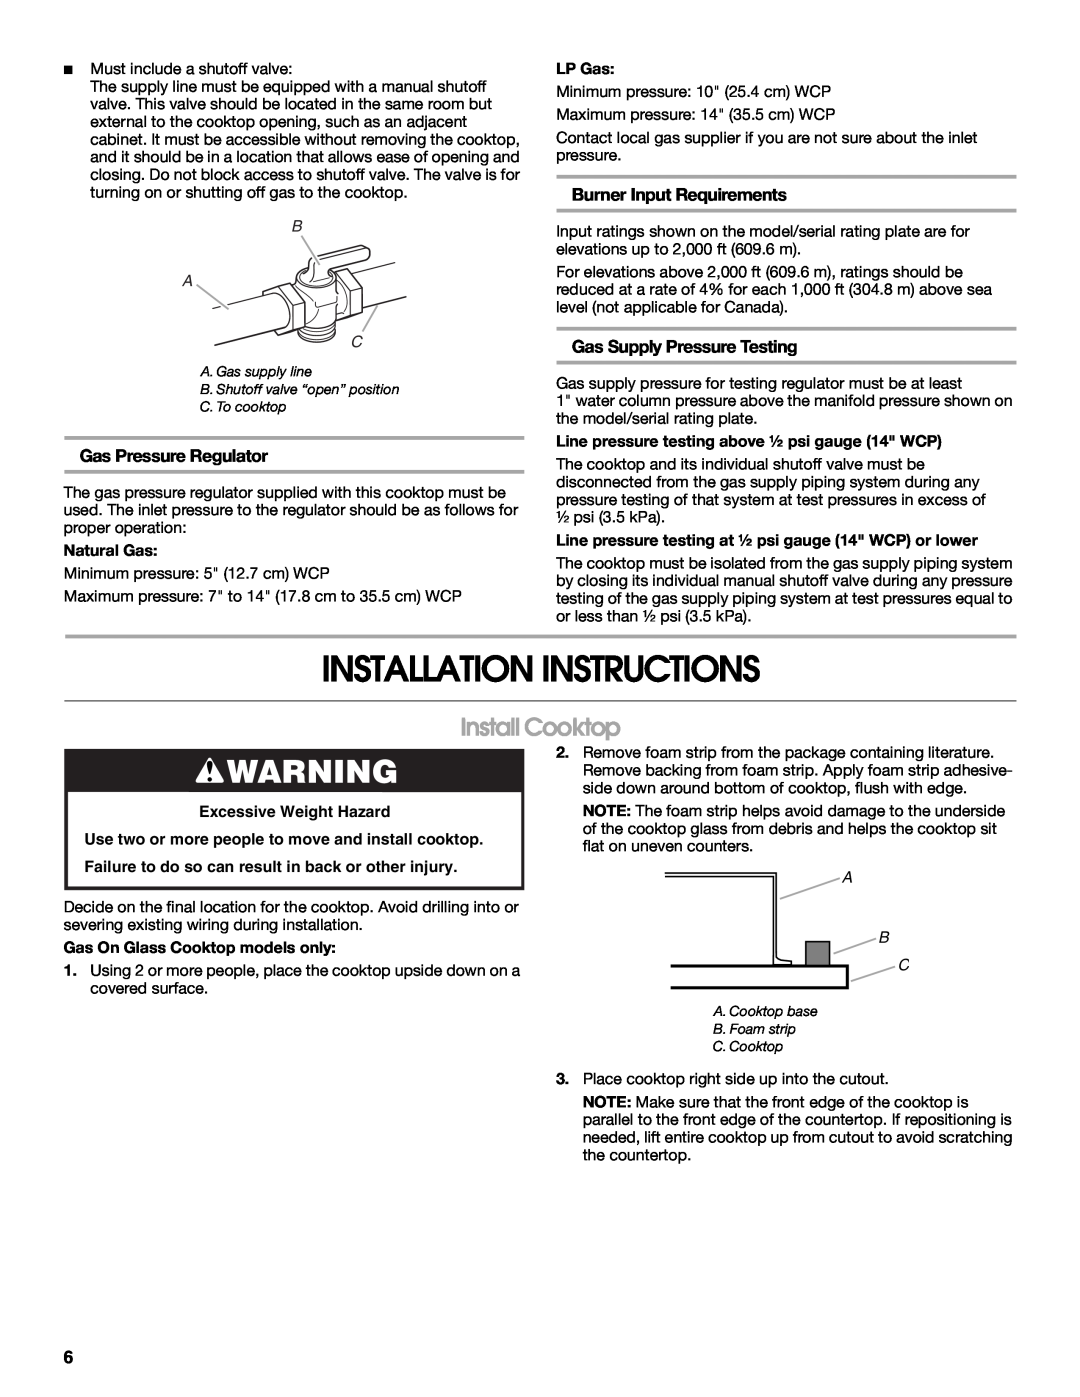 Whirlpool W10545672A Installation Instructions, Install Cooktop, Gas Pressure Regulator, Burner Input Requirements, B A C 